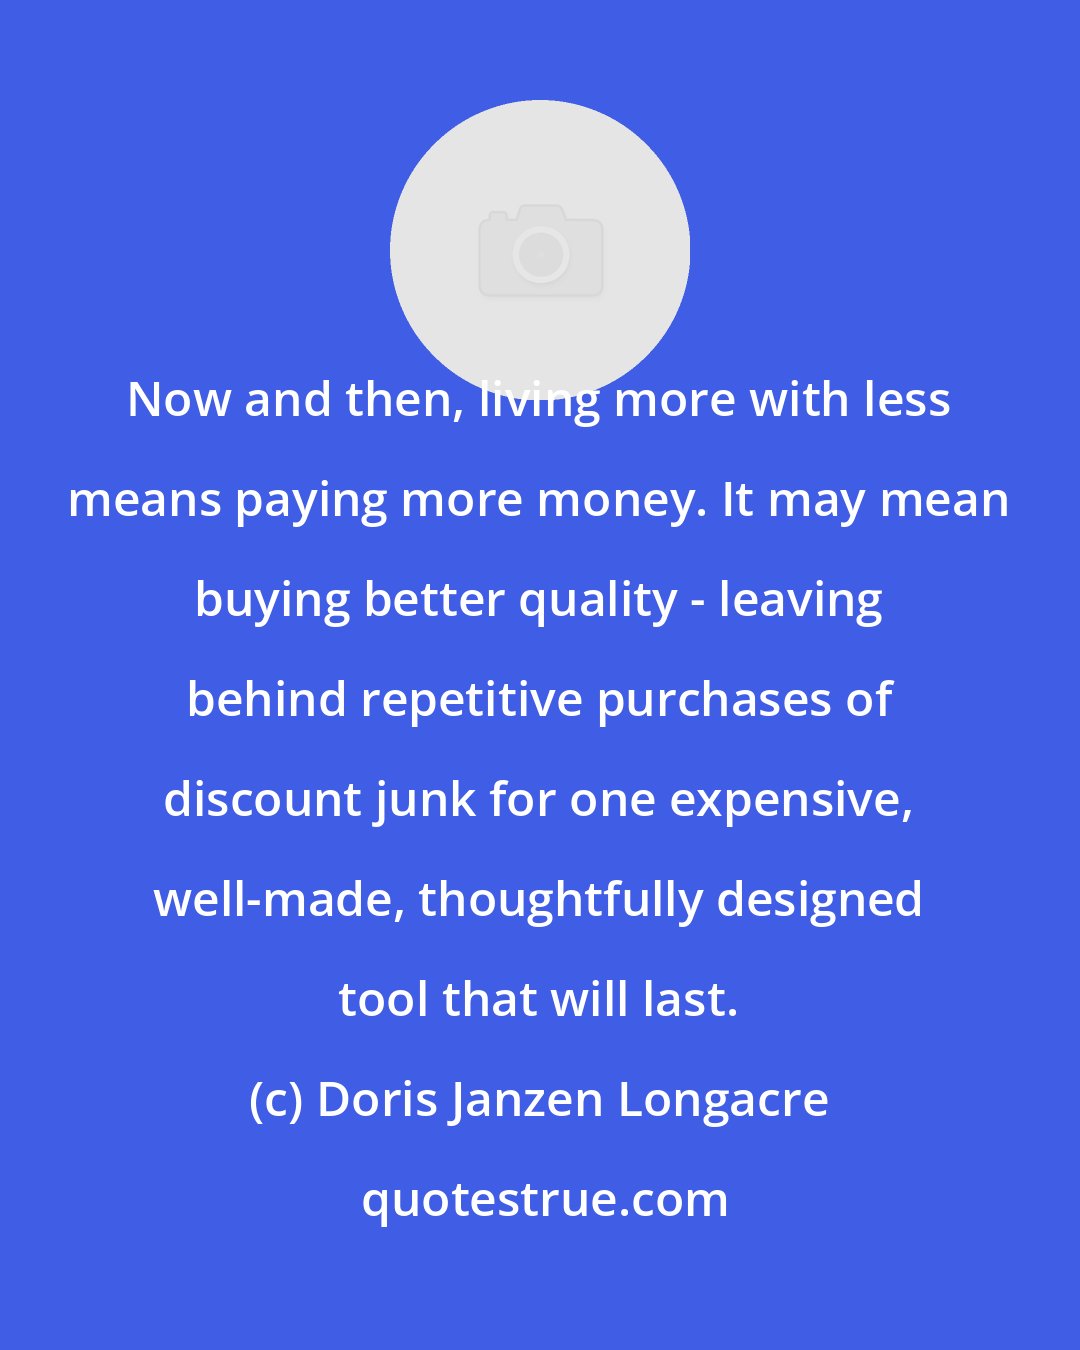 Doris Janzen Longacre: Now and then, living more with less means paying more money. It may mean buying better quality - leaving behind repetitive purchases of discount junk for one expensive, well-made, thoughtfully designed tool that will last.